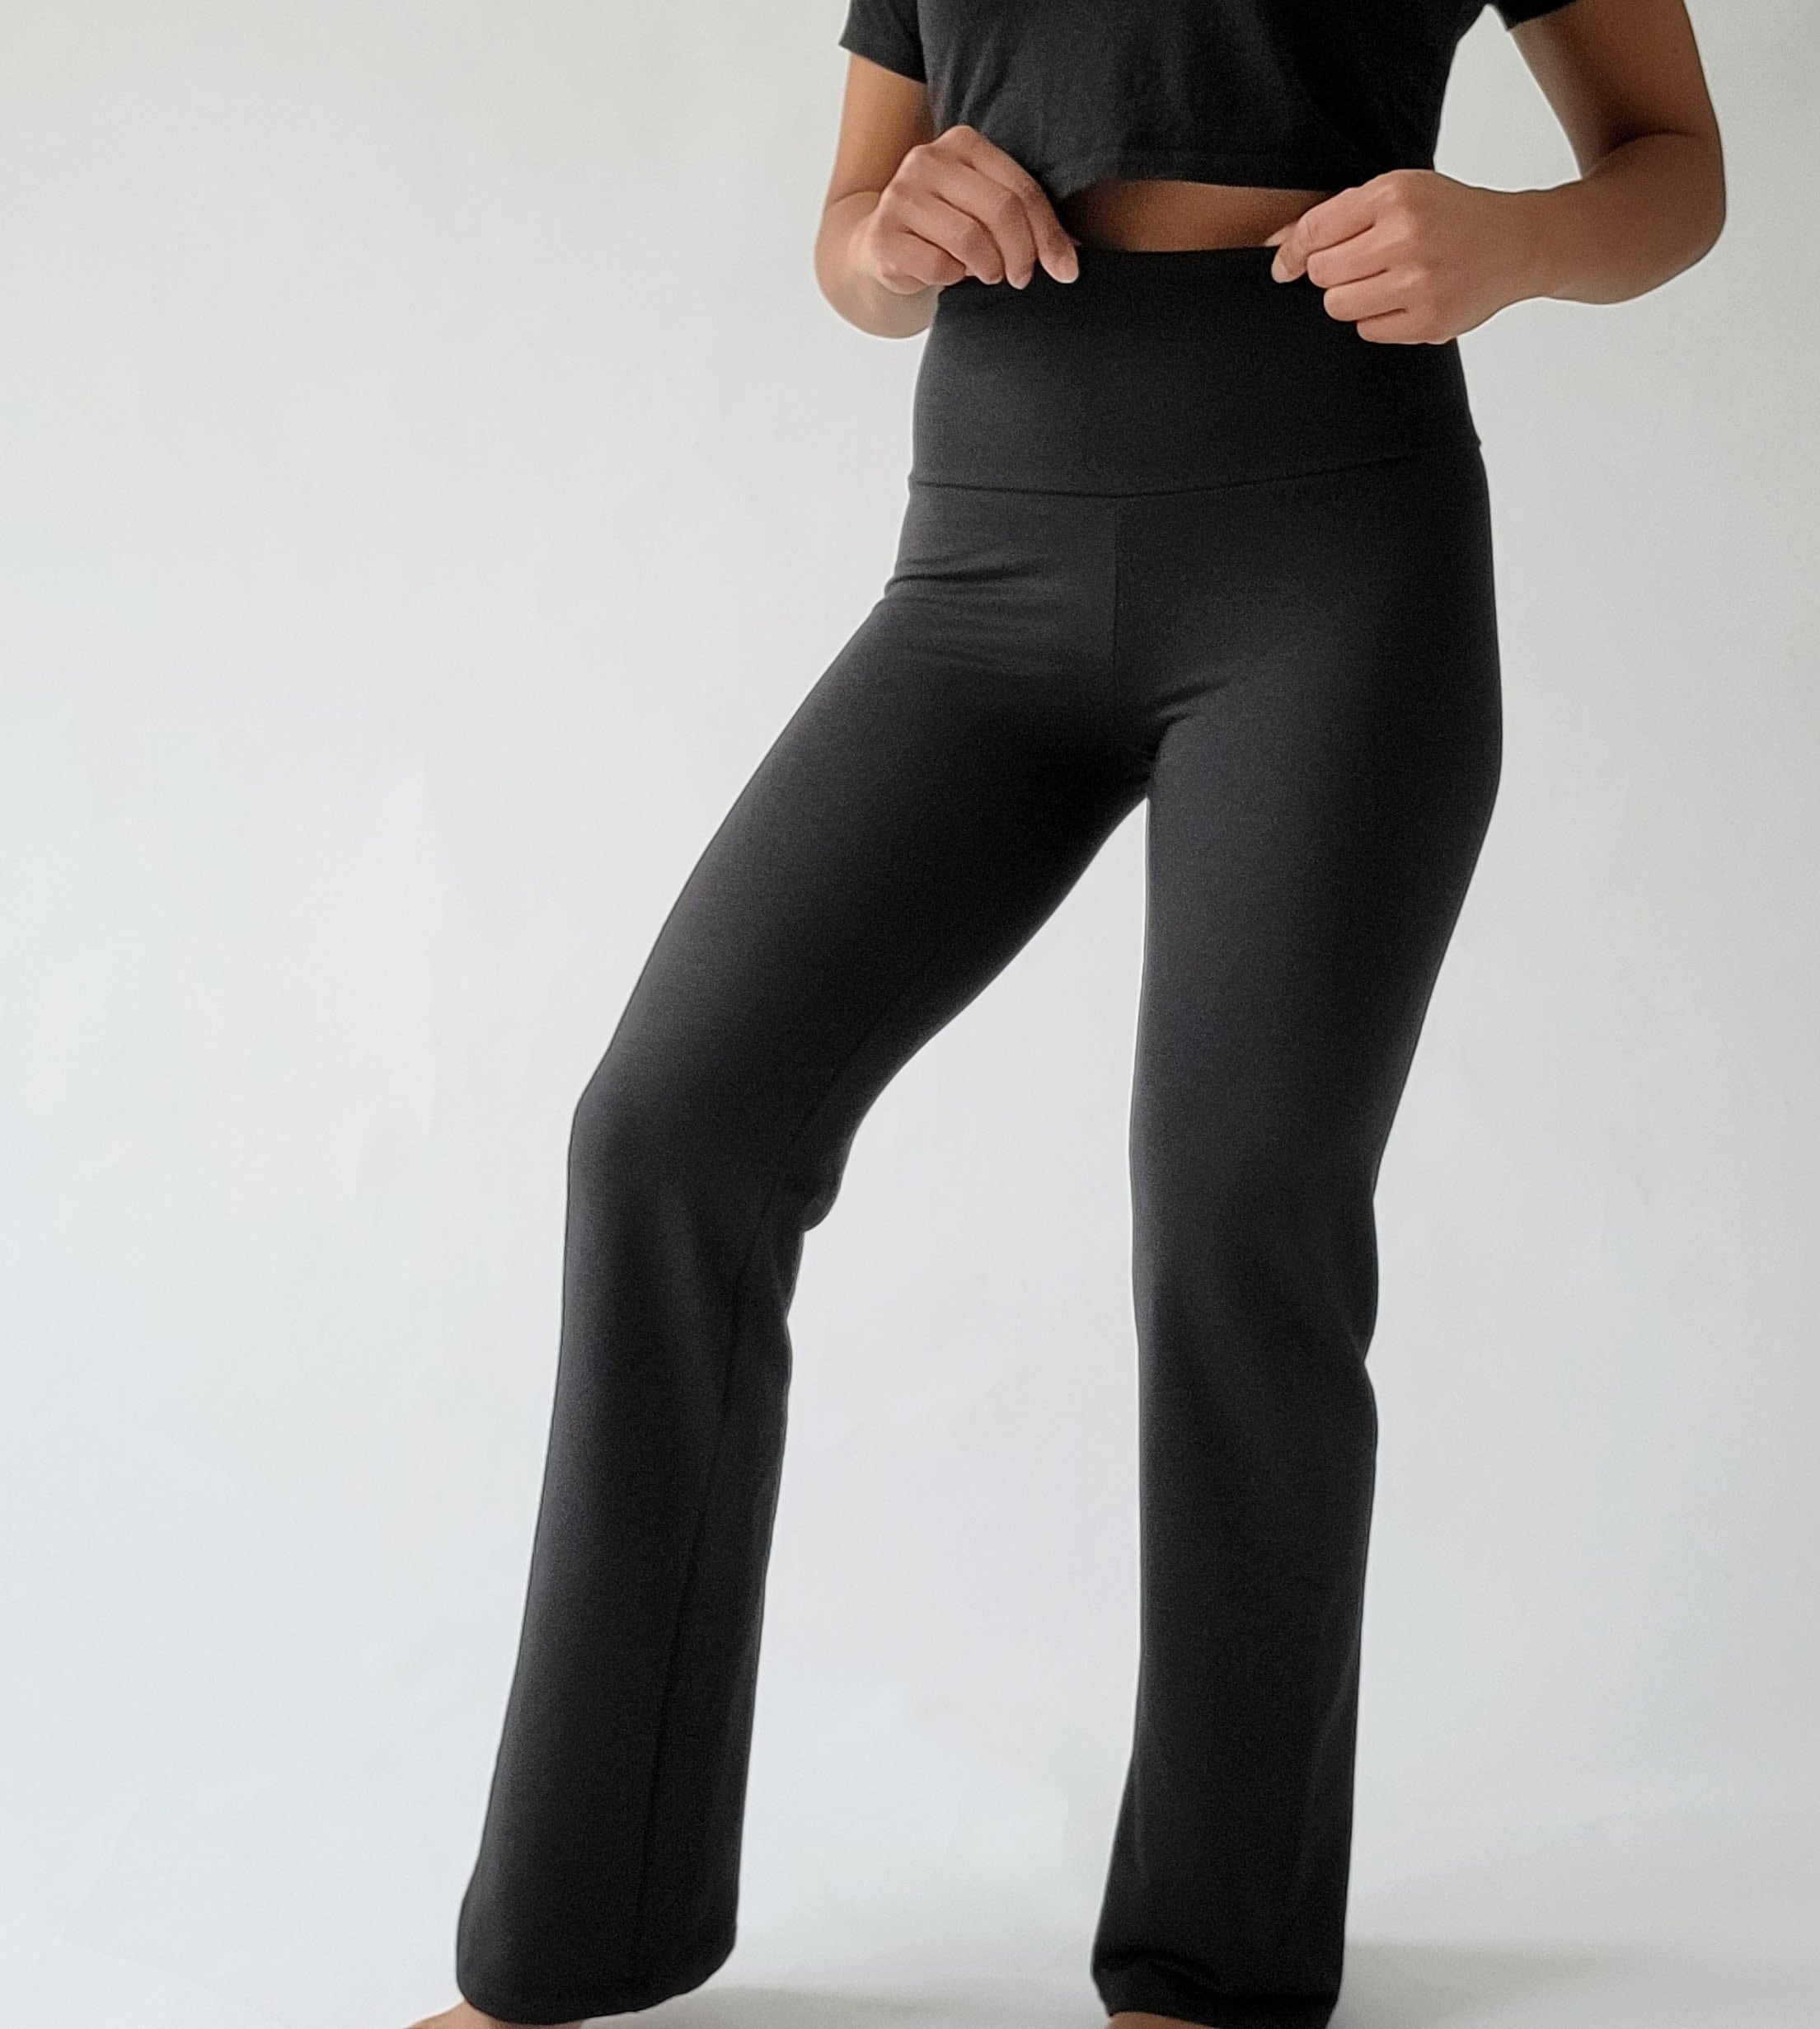  90 Degree By Reflex High Waist Flare Yoga Pant with Front Split  - Rouge Blush - XS : Clothing, Shoes & Jewelry